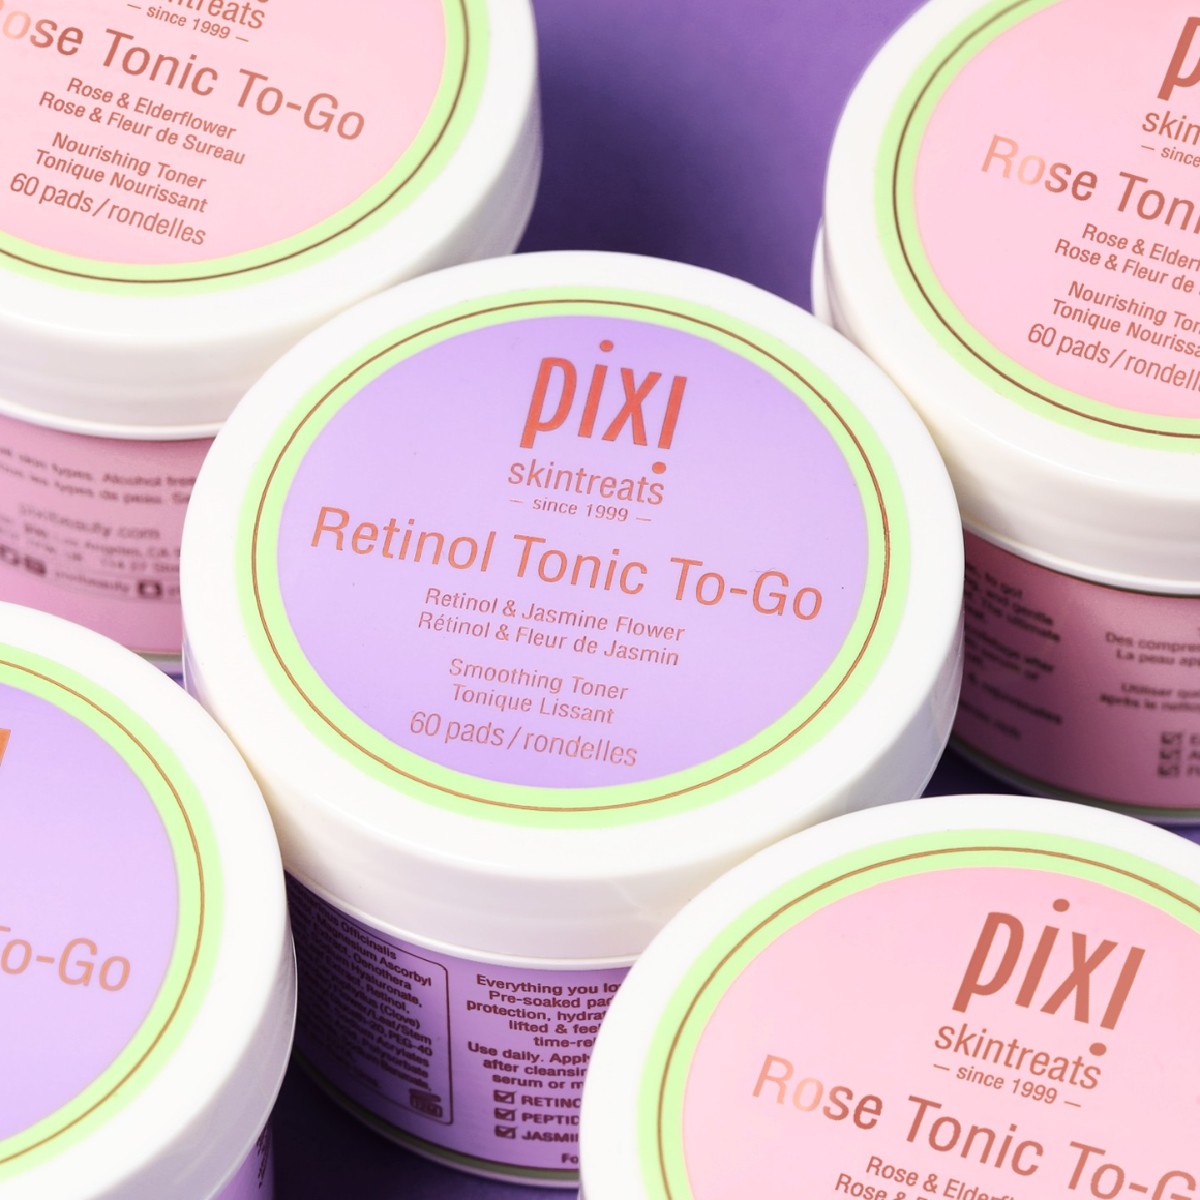 Refine and refresh on-the-go! ✨ Retinol Tonic To-Go brings you 60 pre-soaked pads, steeped in a rejuvenating formula blend of Retinol, Peptides and Jasmine Flower to firm and balance. Simply smooth these mineral-rich pre-soaked pads onto skin! 💚✨ #PixiBeauty #Skincare